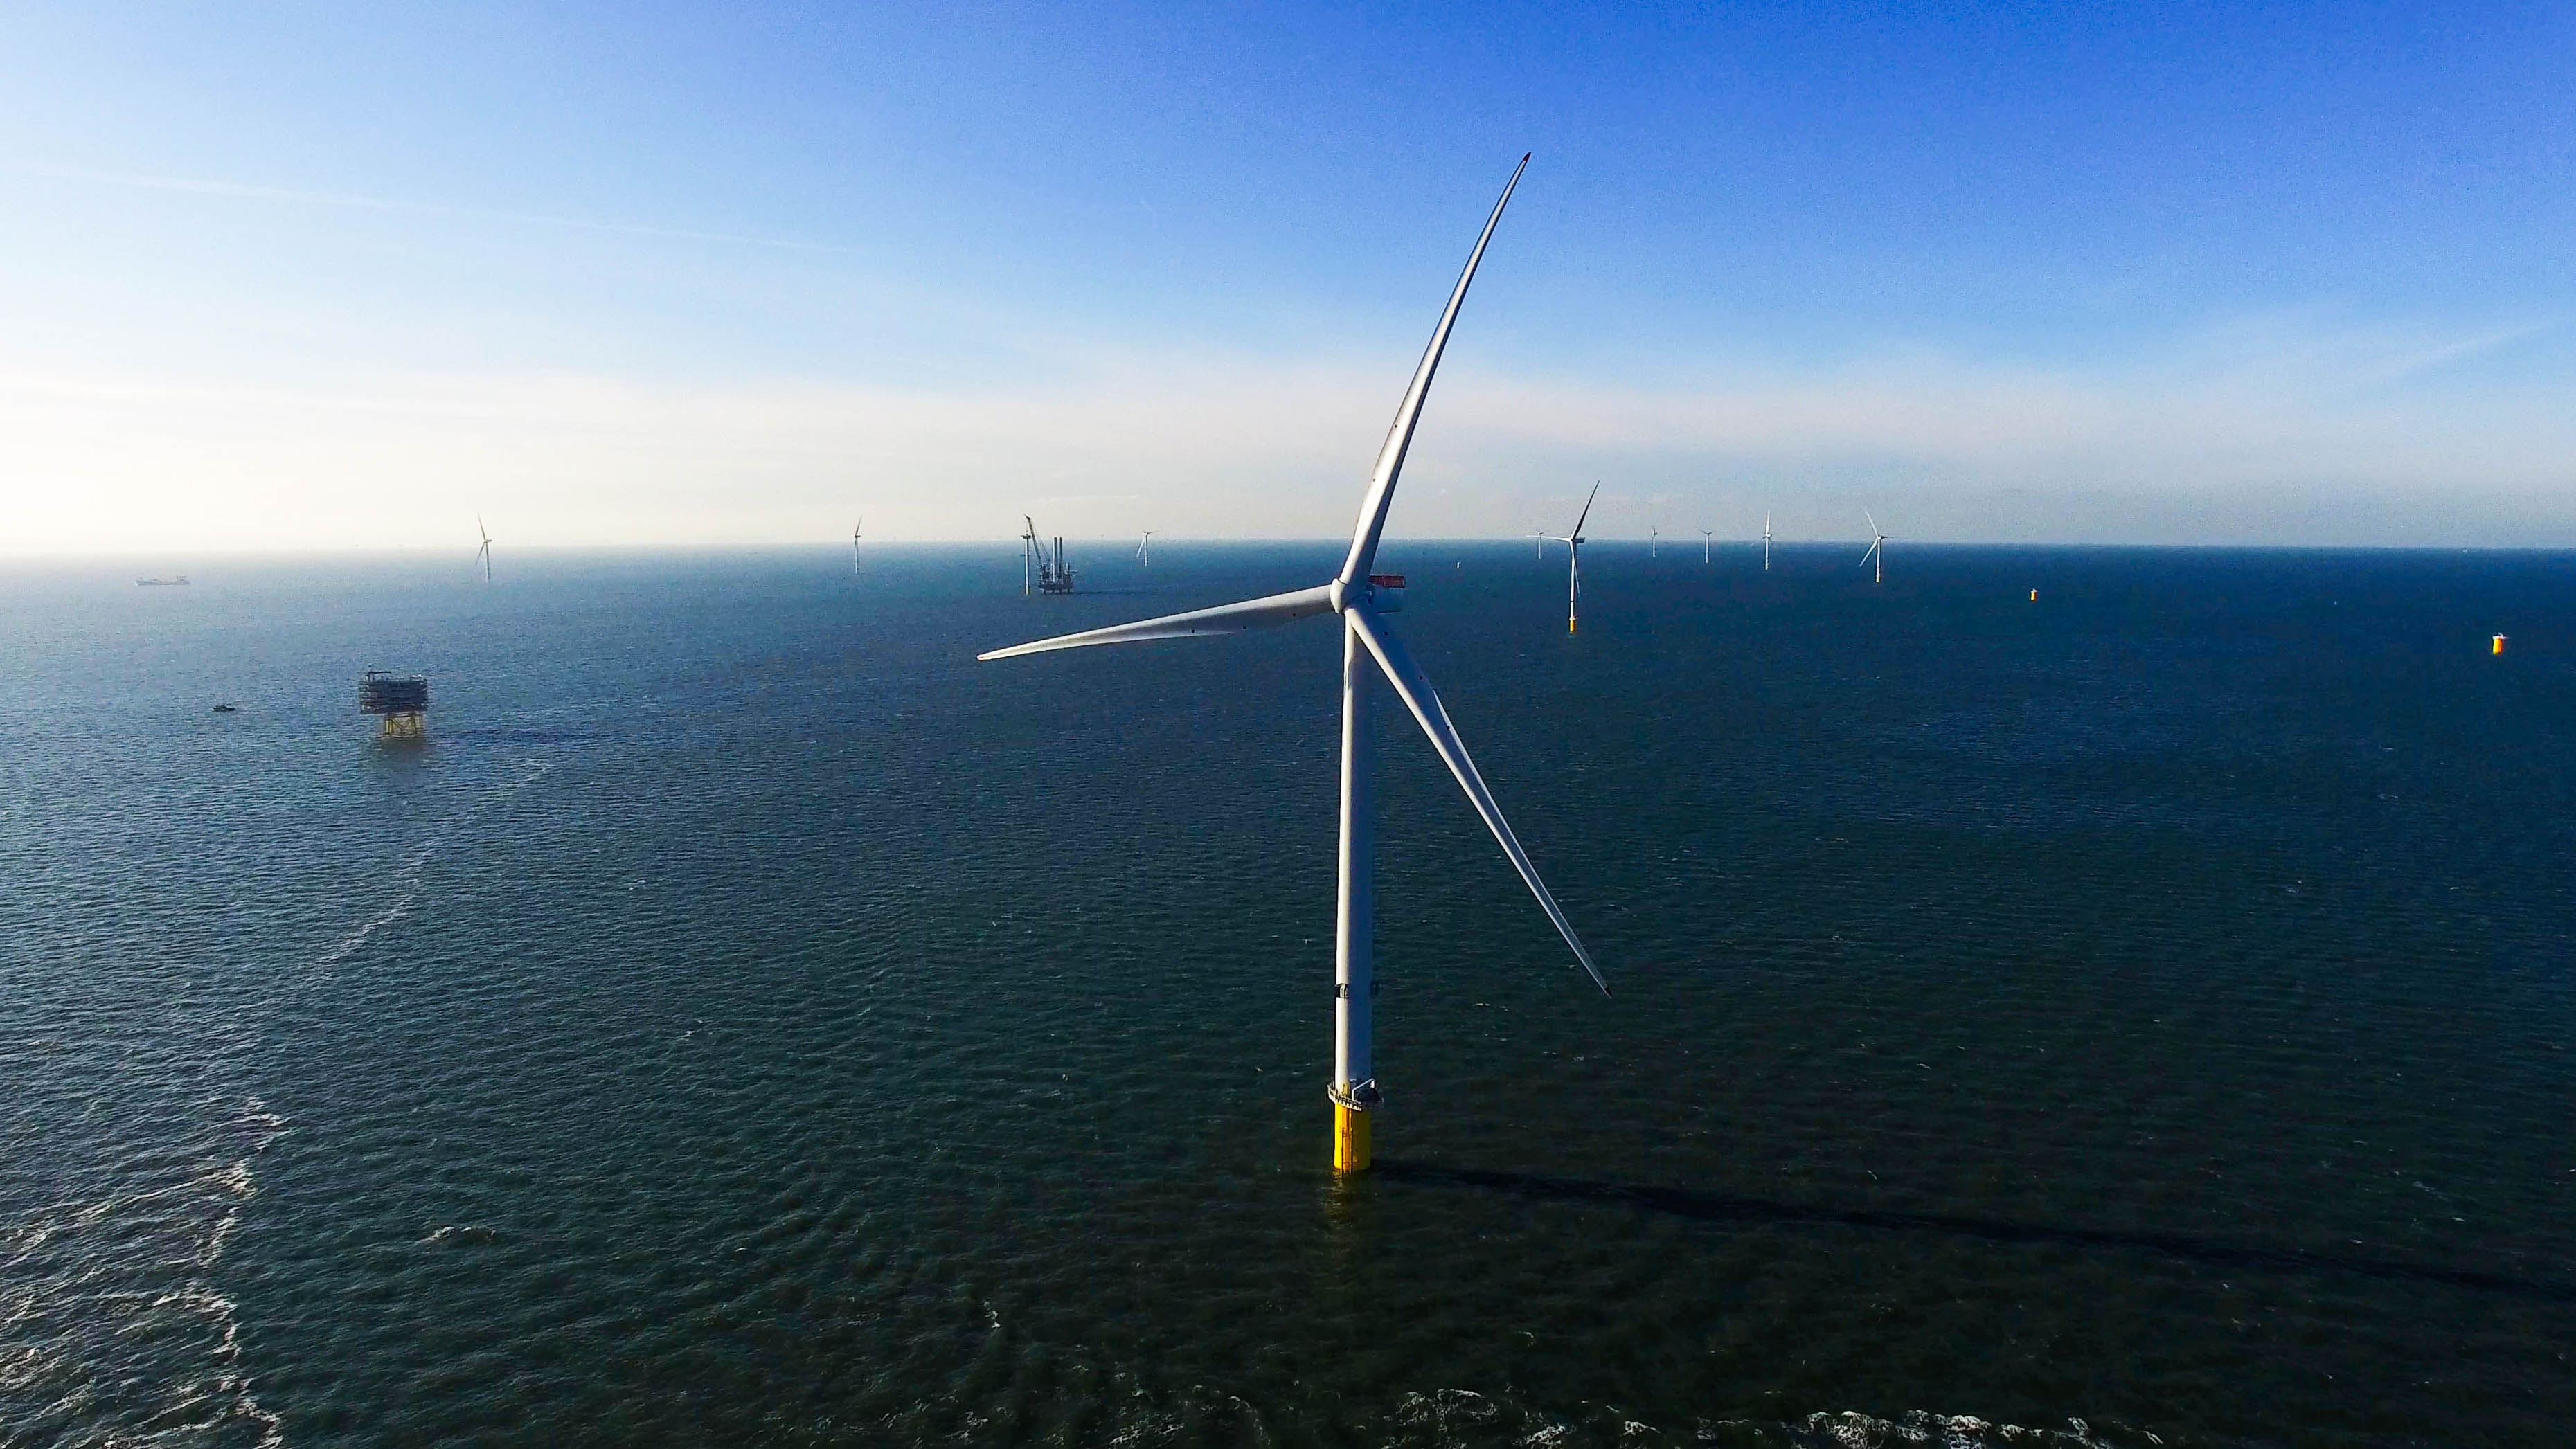 Ørsted offshore wind farm Burbo Bank Extension with one wind turbine in the centre of photograph